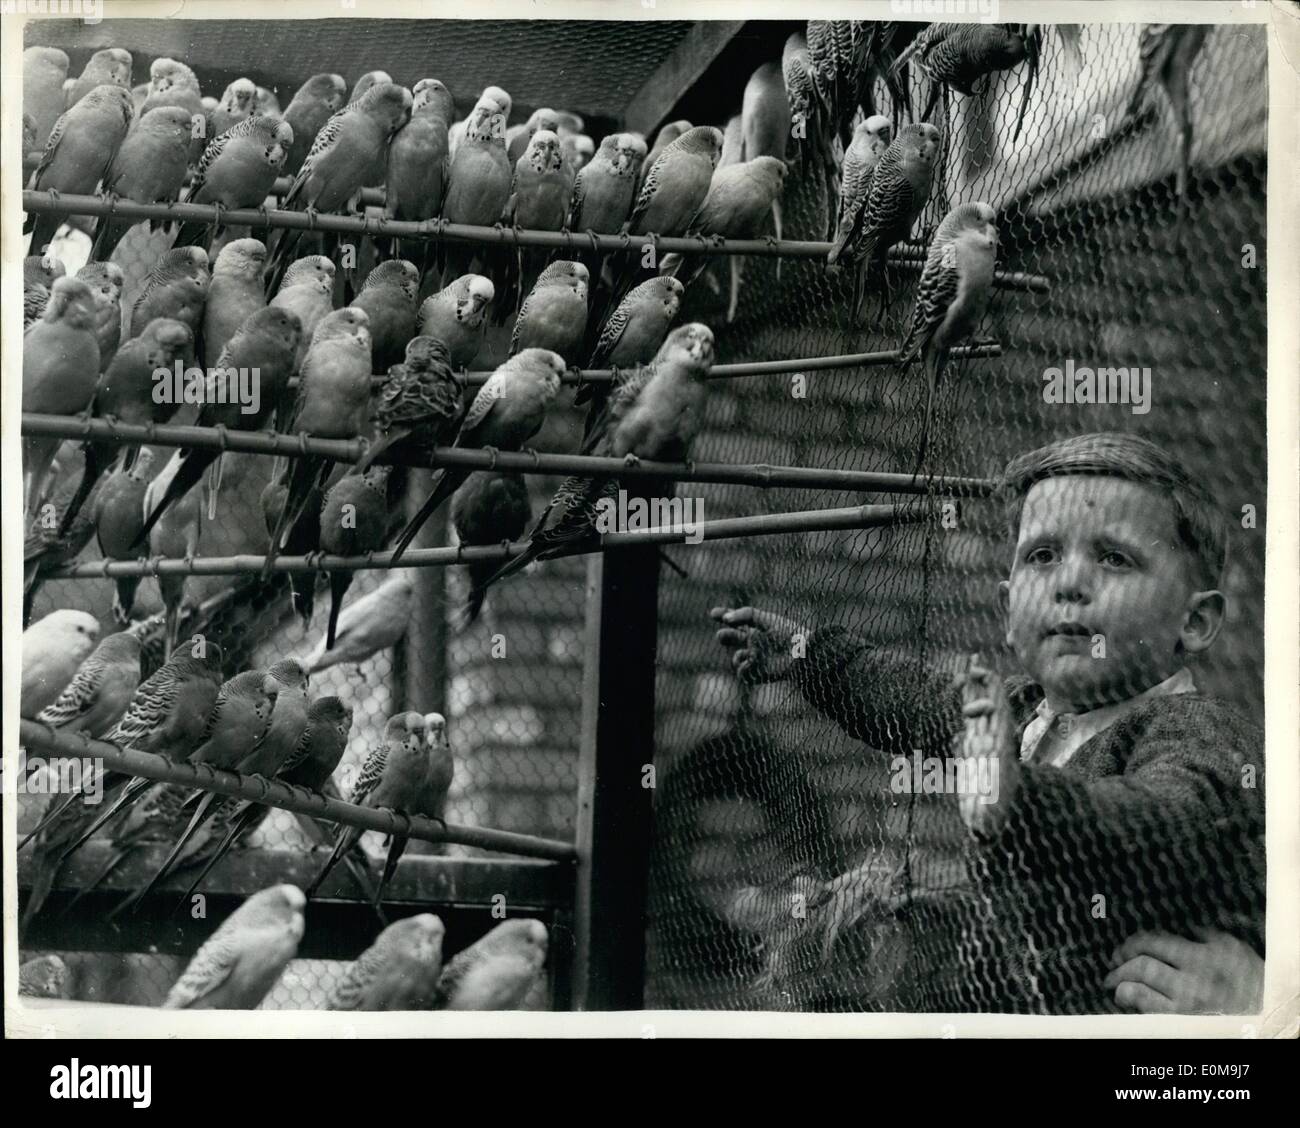 Apr. 04, 1954 - Policeman Sam ''Takes-In'' Three Hundred ''Lodgers''. Budgerigars As ''Exhibits''.: When police in Birkenhead had a fraud charge to deal with - which involved nearly three hundred budgerigars - Mr. Sam Thompson a Birkenhead Policeman decided to take the ''exhibits'' in as Lodgers - he is a bird fancier himself. Here is two year old Sam Thompson Jnr. admiring some of the ''lodgers'' in his father's aviary in the garden of his home. Stock Photo